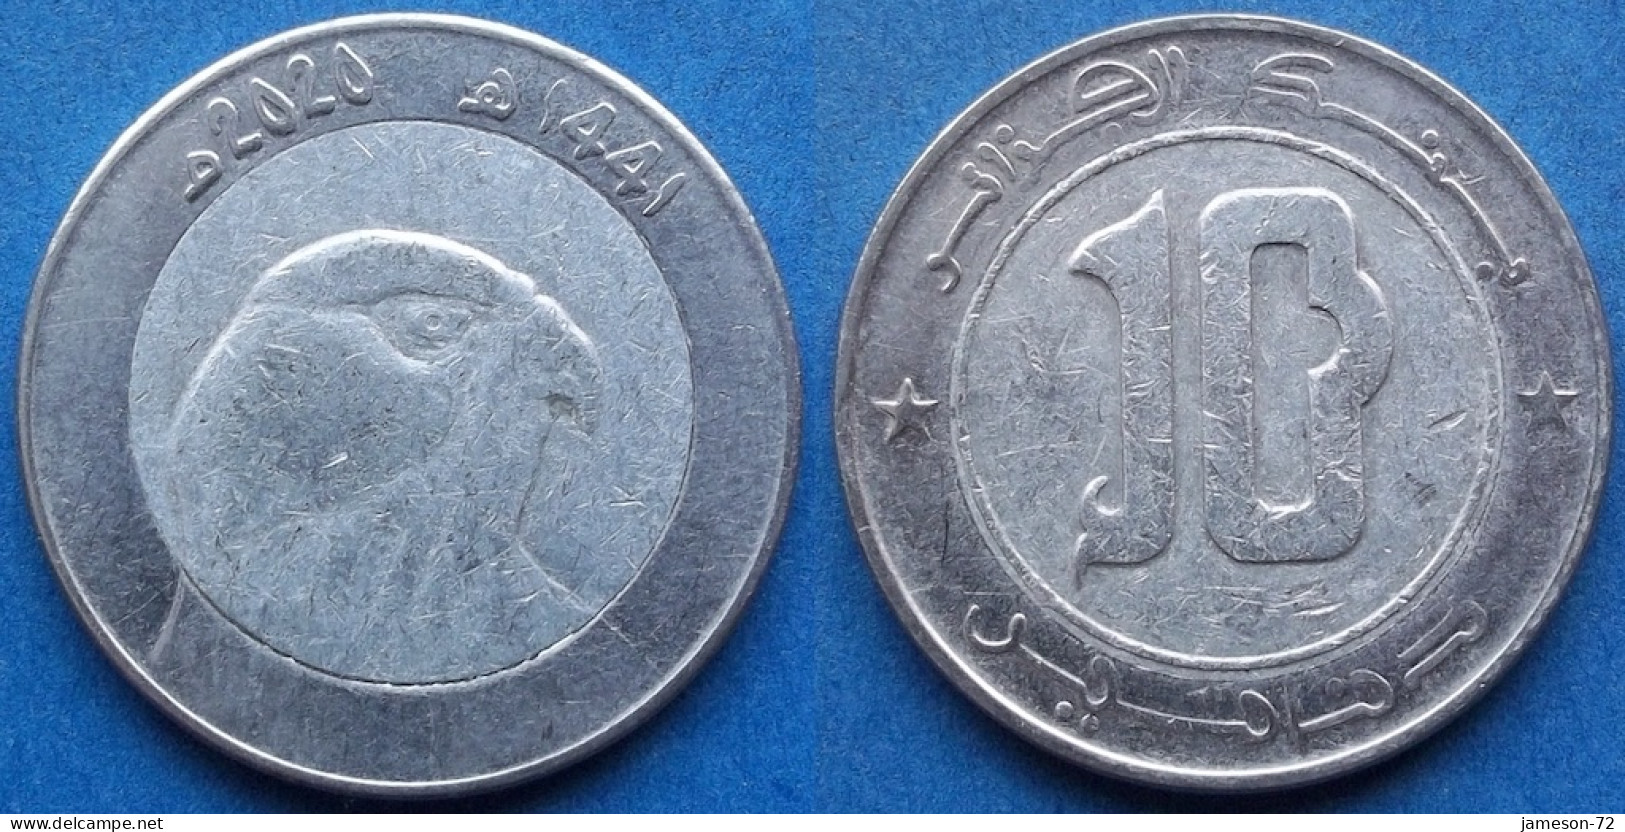 ALGERIA - 10 Dinars AH1441 2020AD "Barbary Falcon" KM# 124 Independent (1962) - Edelweiss Coins - Algerien